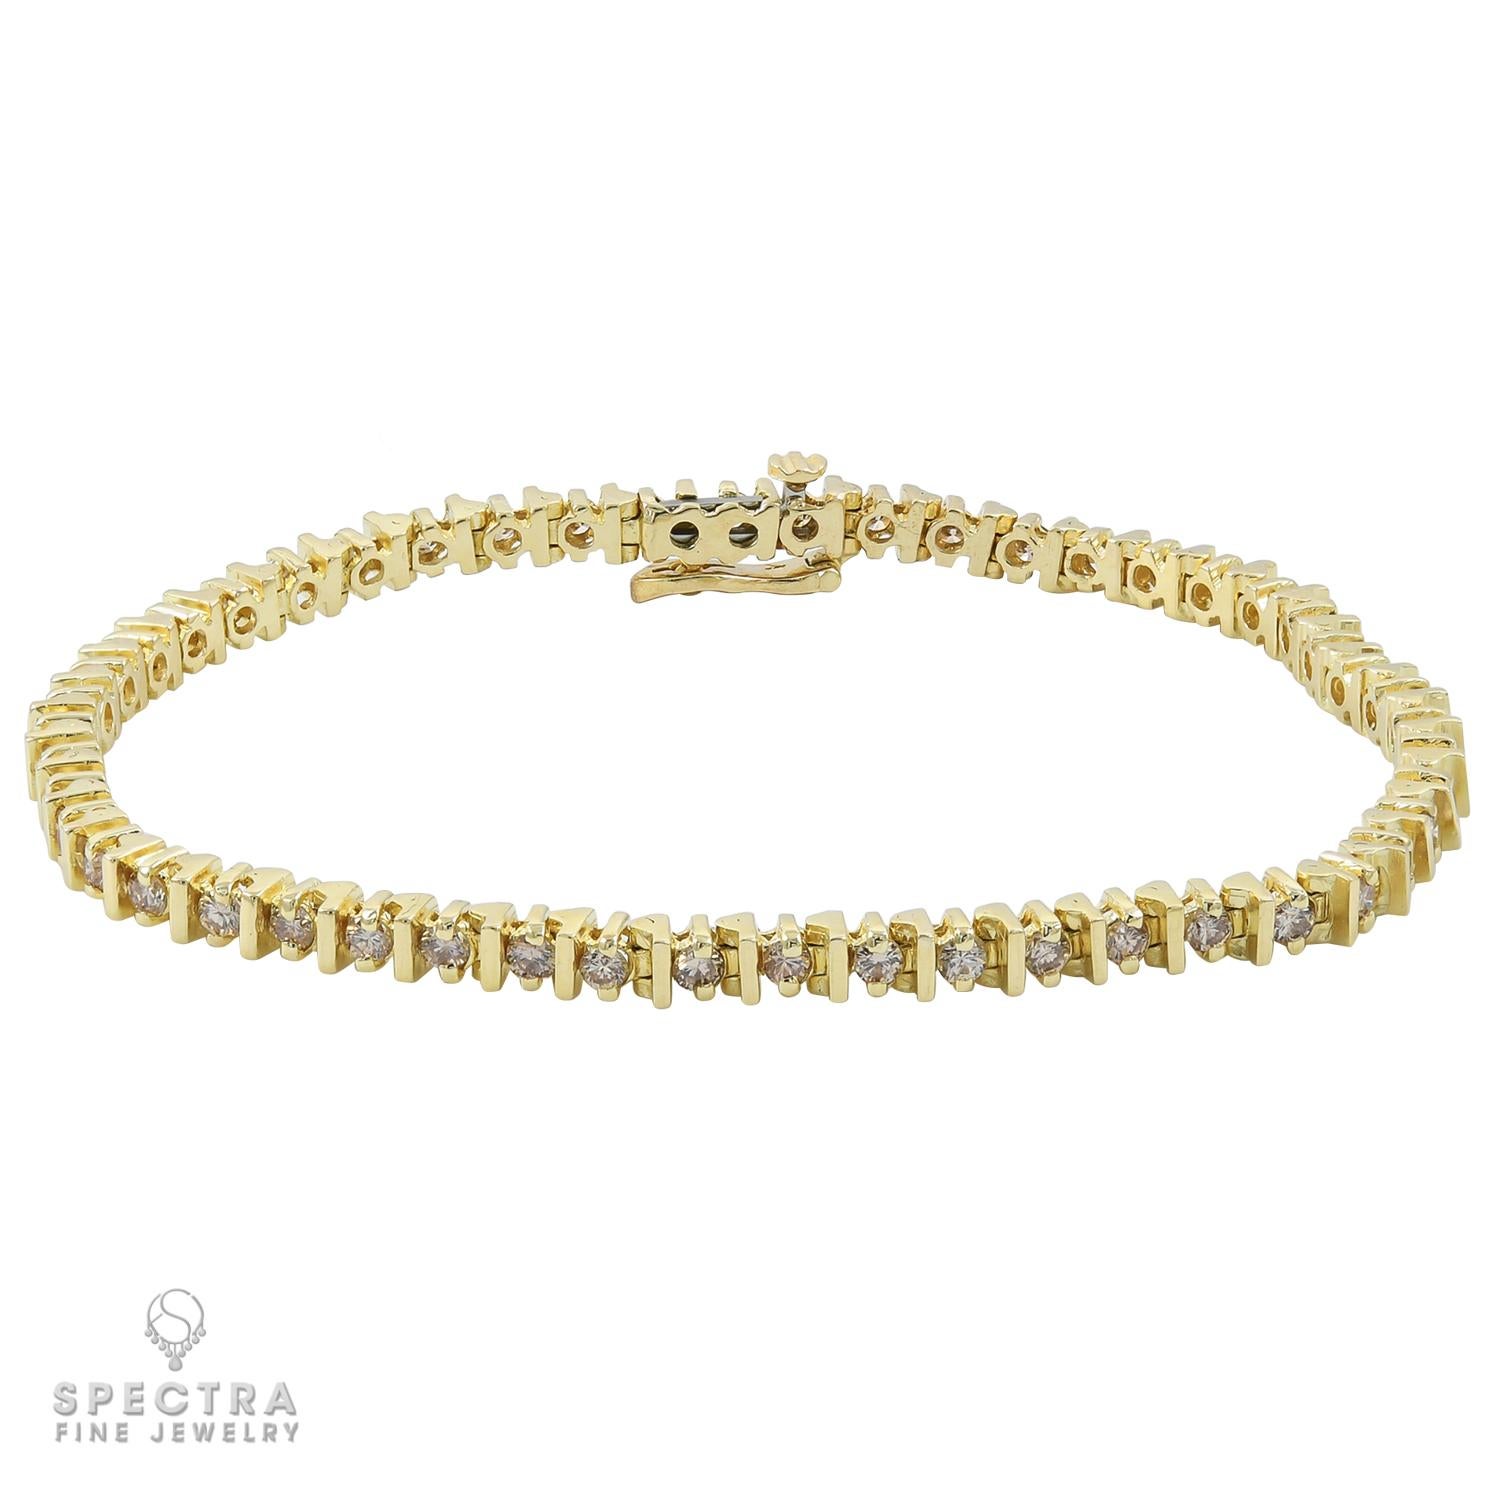 A tennis bracelet comprising of 50 diamonds weighing a total of 2.5 carats. Each diamond weighs 0.05 carat.
Diamonds are natural, not certified, with H-I color, VS-SI clarity.
7.25 inches long.
Metal is 14k yellow gold, gross weight 10.2 gram.